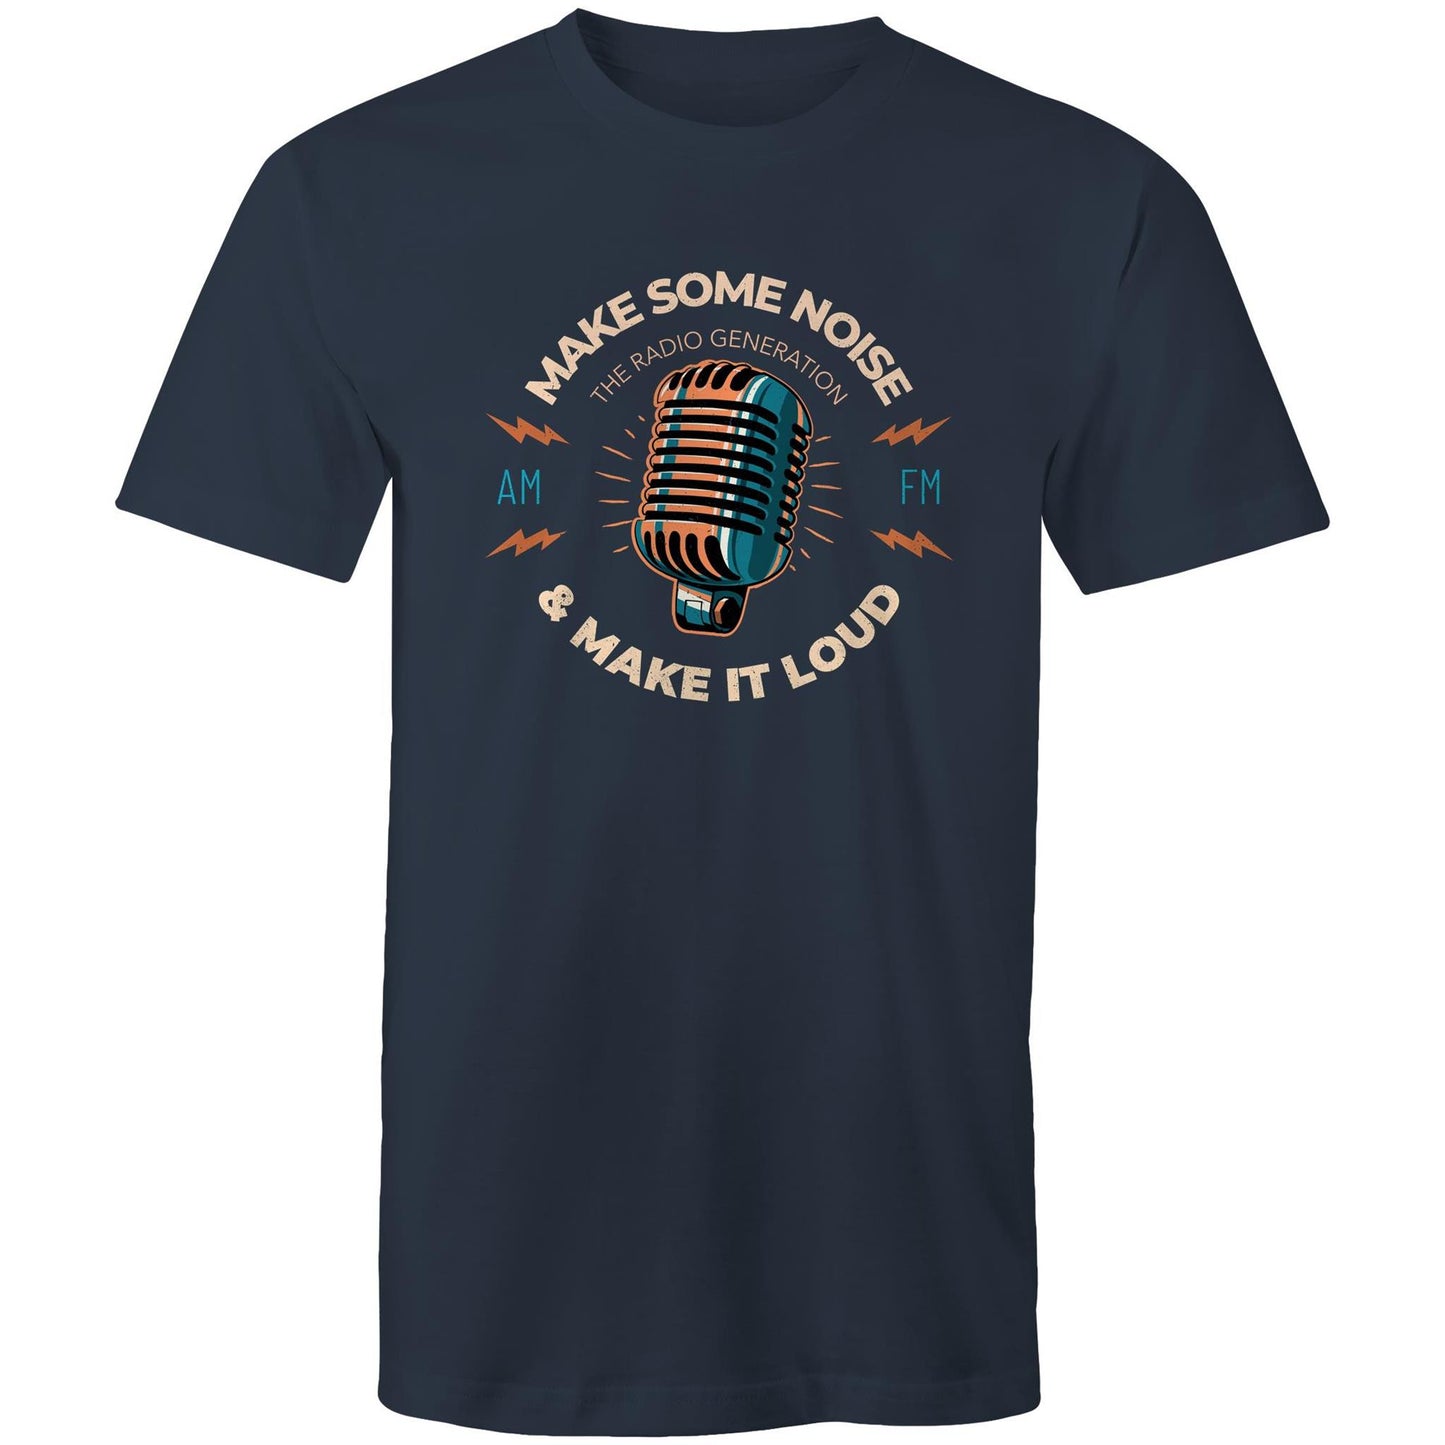 Make Some Noise And Make It Loud - Mens T-Shirt Navy Mens T-shirt Music